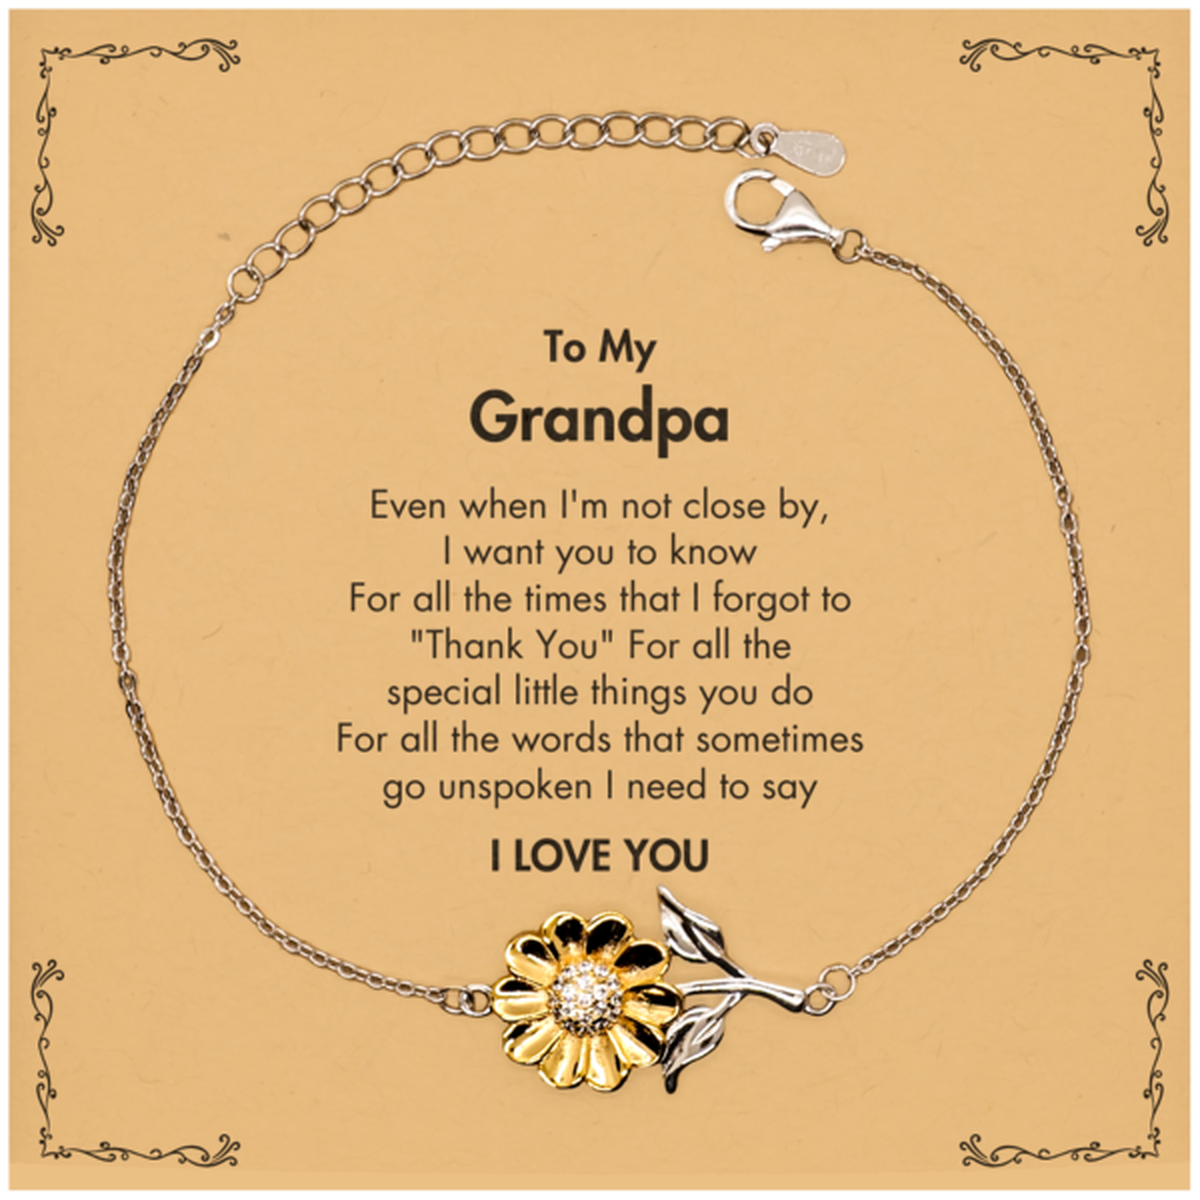 Thank You Gifts for Grandpa, Keepsake Sunflower Bracelet Gifts for Grandpa Birthday Mother's day Father's Day Grandpa For all the words That sometimes go unspoken I need to say I LOVE YOU